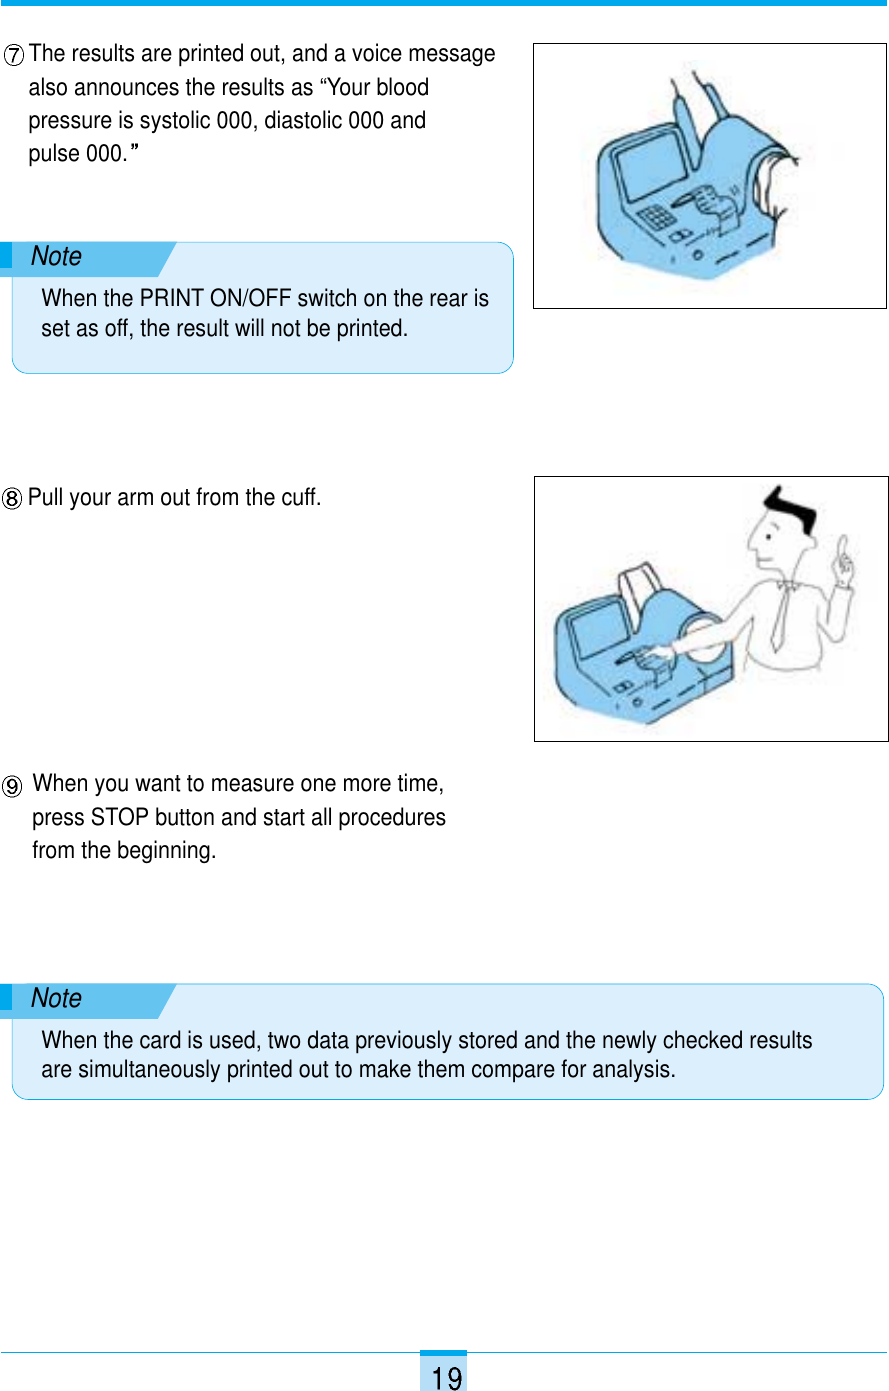 The results are printed out, and a voice messagealso announces the results as “Your bloodpressure is systolic 000, diastolic 000 and pulse 000.NoteWhen the PRINT ON/OFF switch on the rear isset as off, the result will not be printed.Pull your arm out from the cuff.NoteWhen the card is used, two data previously stored and the newly checked resultsare simultaneously printed out to make them compare for analysis.When you want to measure one more time,press STOP button and start all proceduresfrom the beginning.